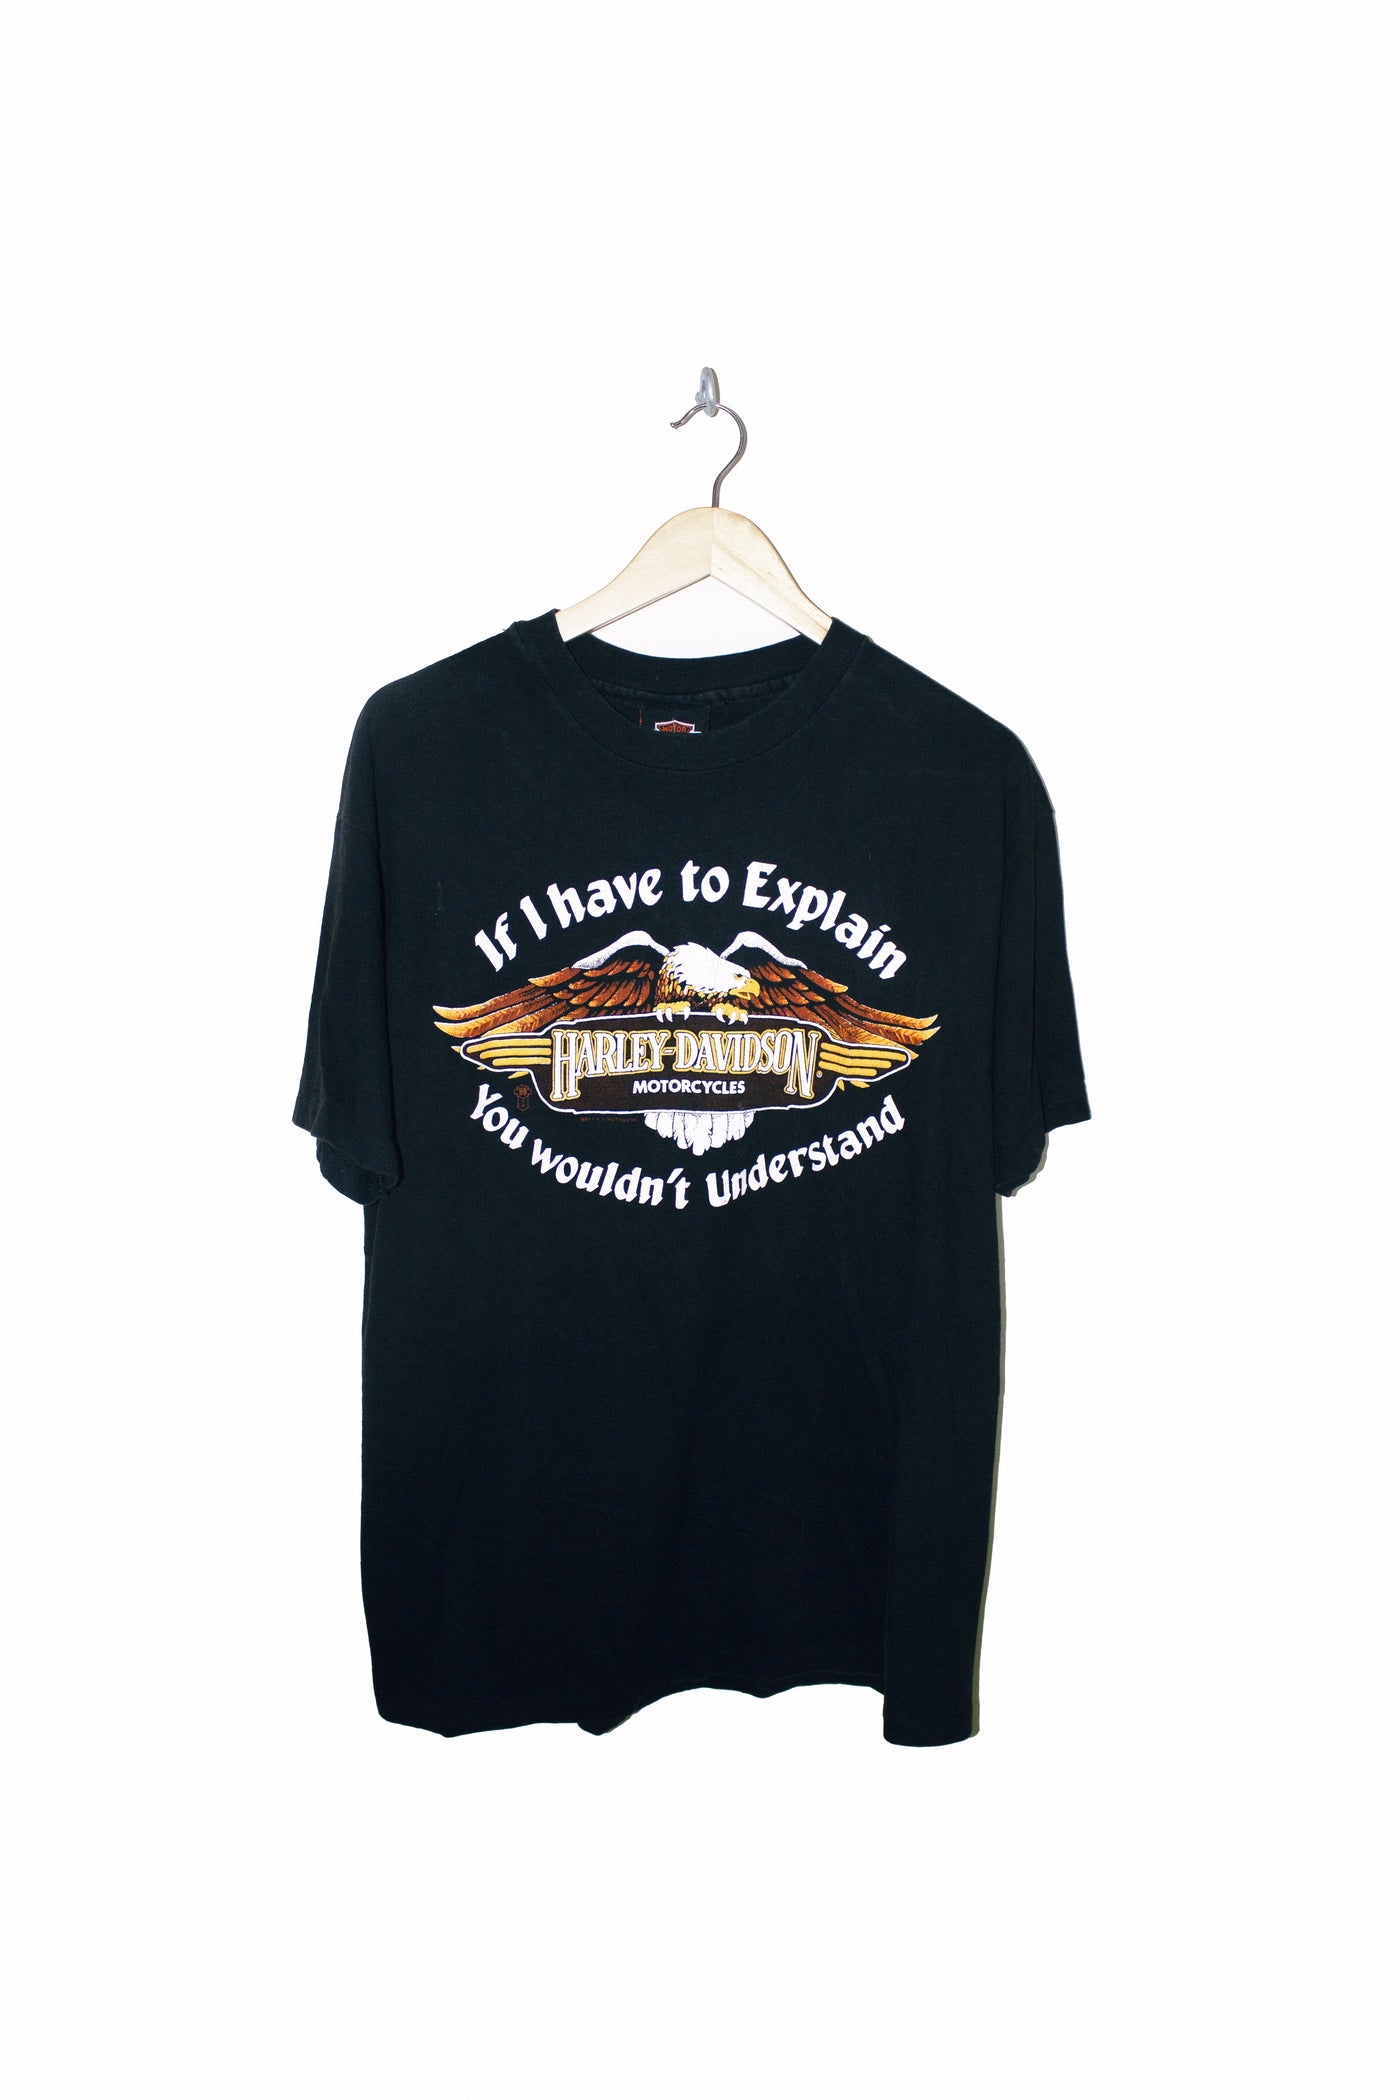 Vintage 1982 If I have to Explain You Wouldn’t Understand T-Shirt